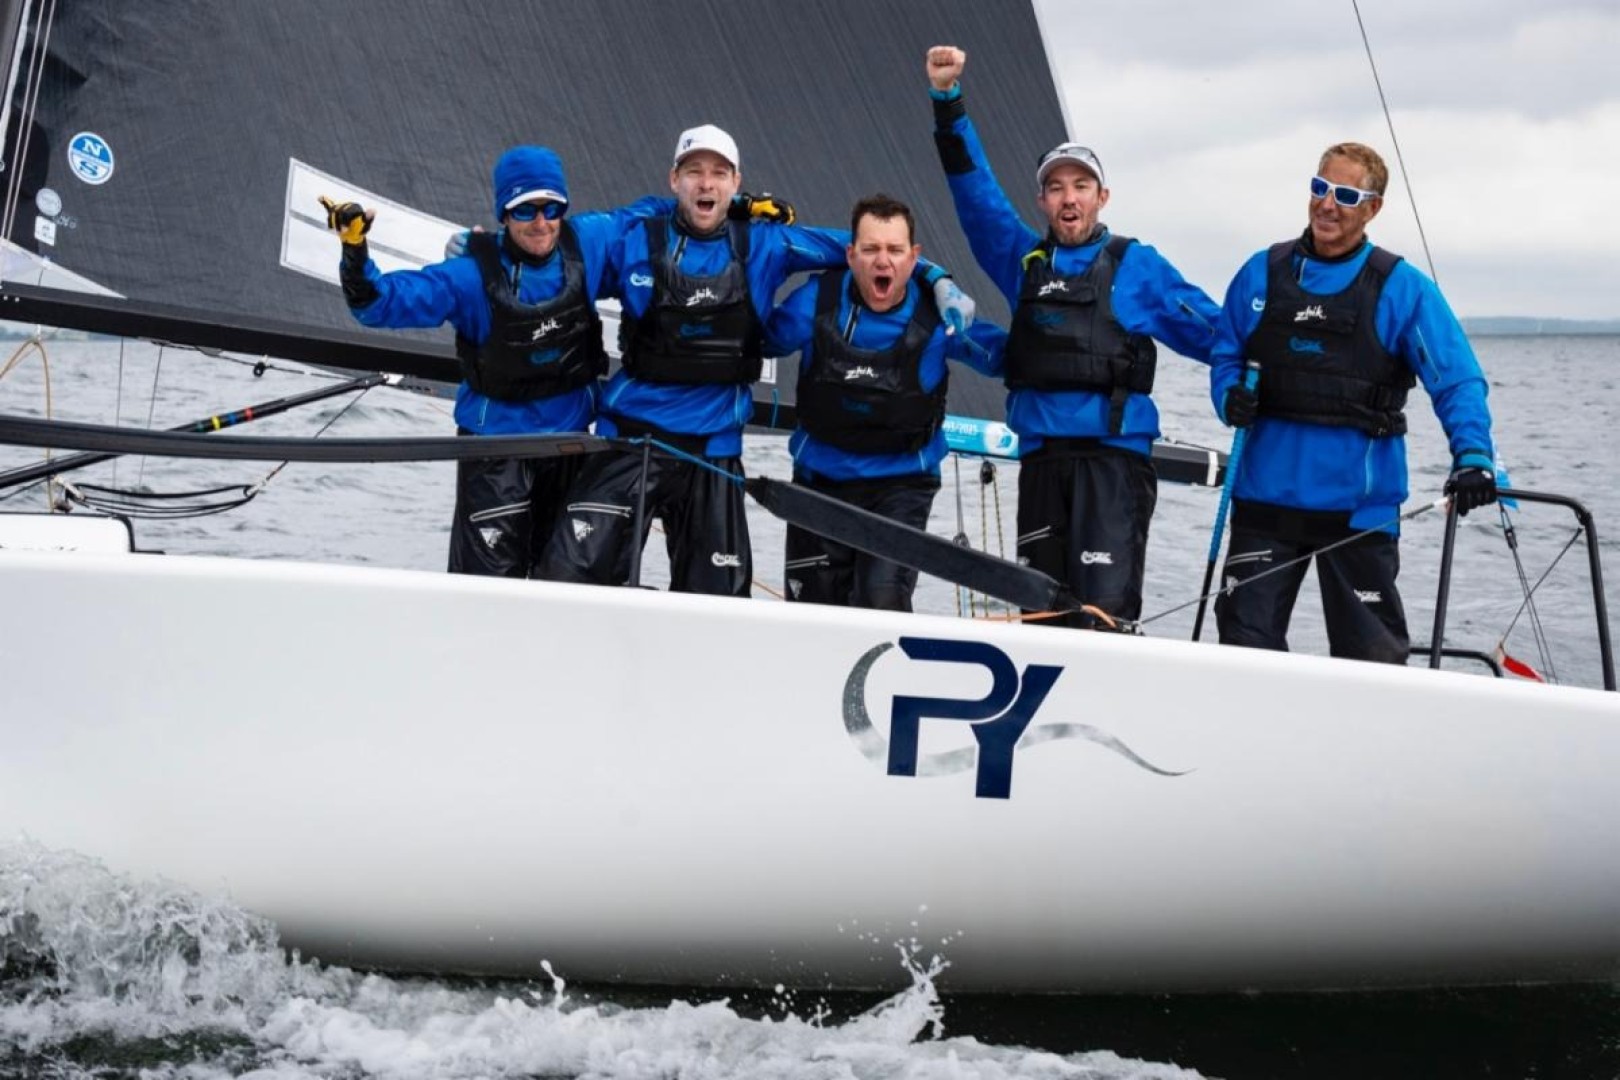 PACIFIC YANKEE USA865 of Drew Freides with Nic Asher, Charlie Smythe, Alec Anderson and Mark Ivey - new Melges 24 World Champions - Melges 24 World Championship 2023 - Middelfart, Denmark © Mick Knive Anderson